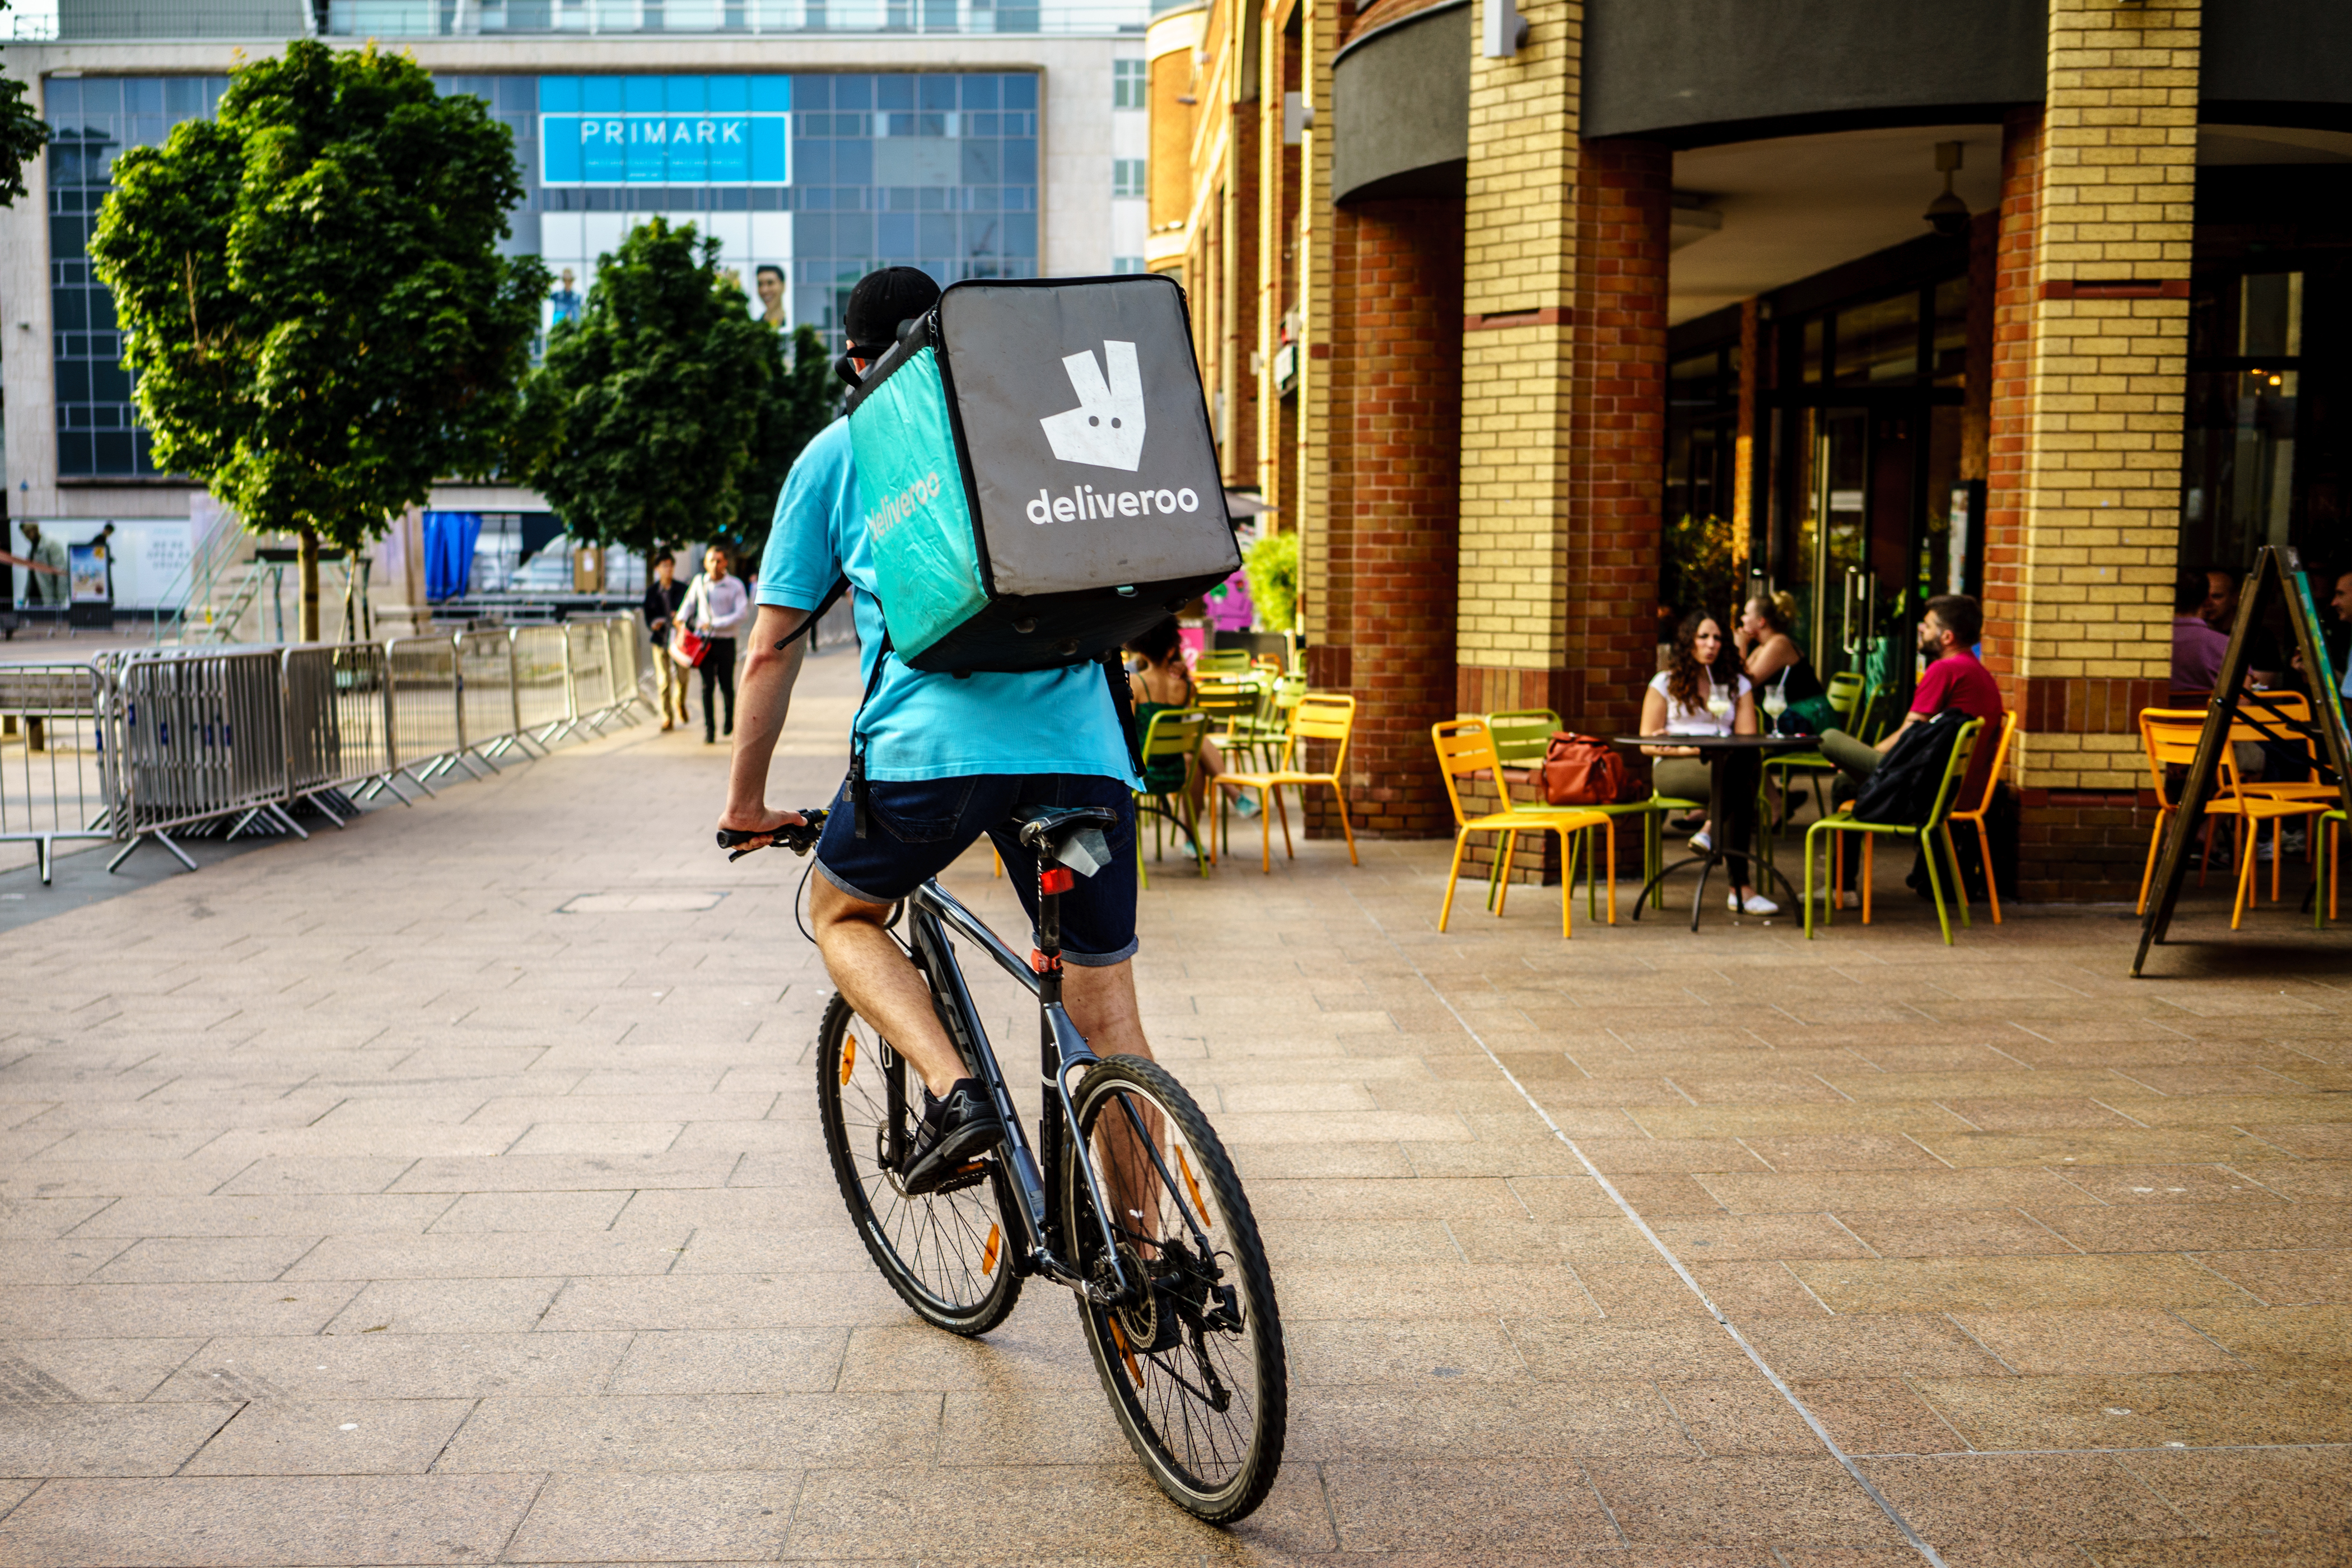 Orders fell 6 per cent at food delivery firm Deliveroo as consumers cut back on non-essential spending